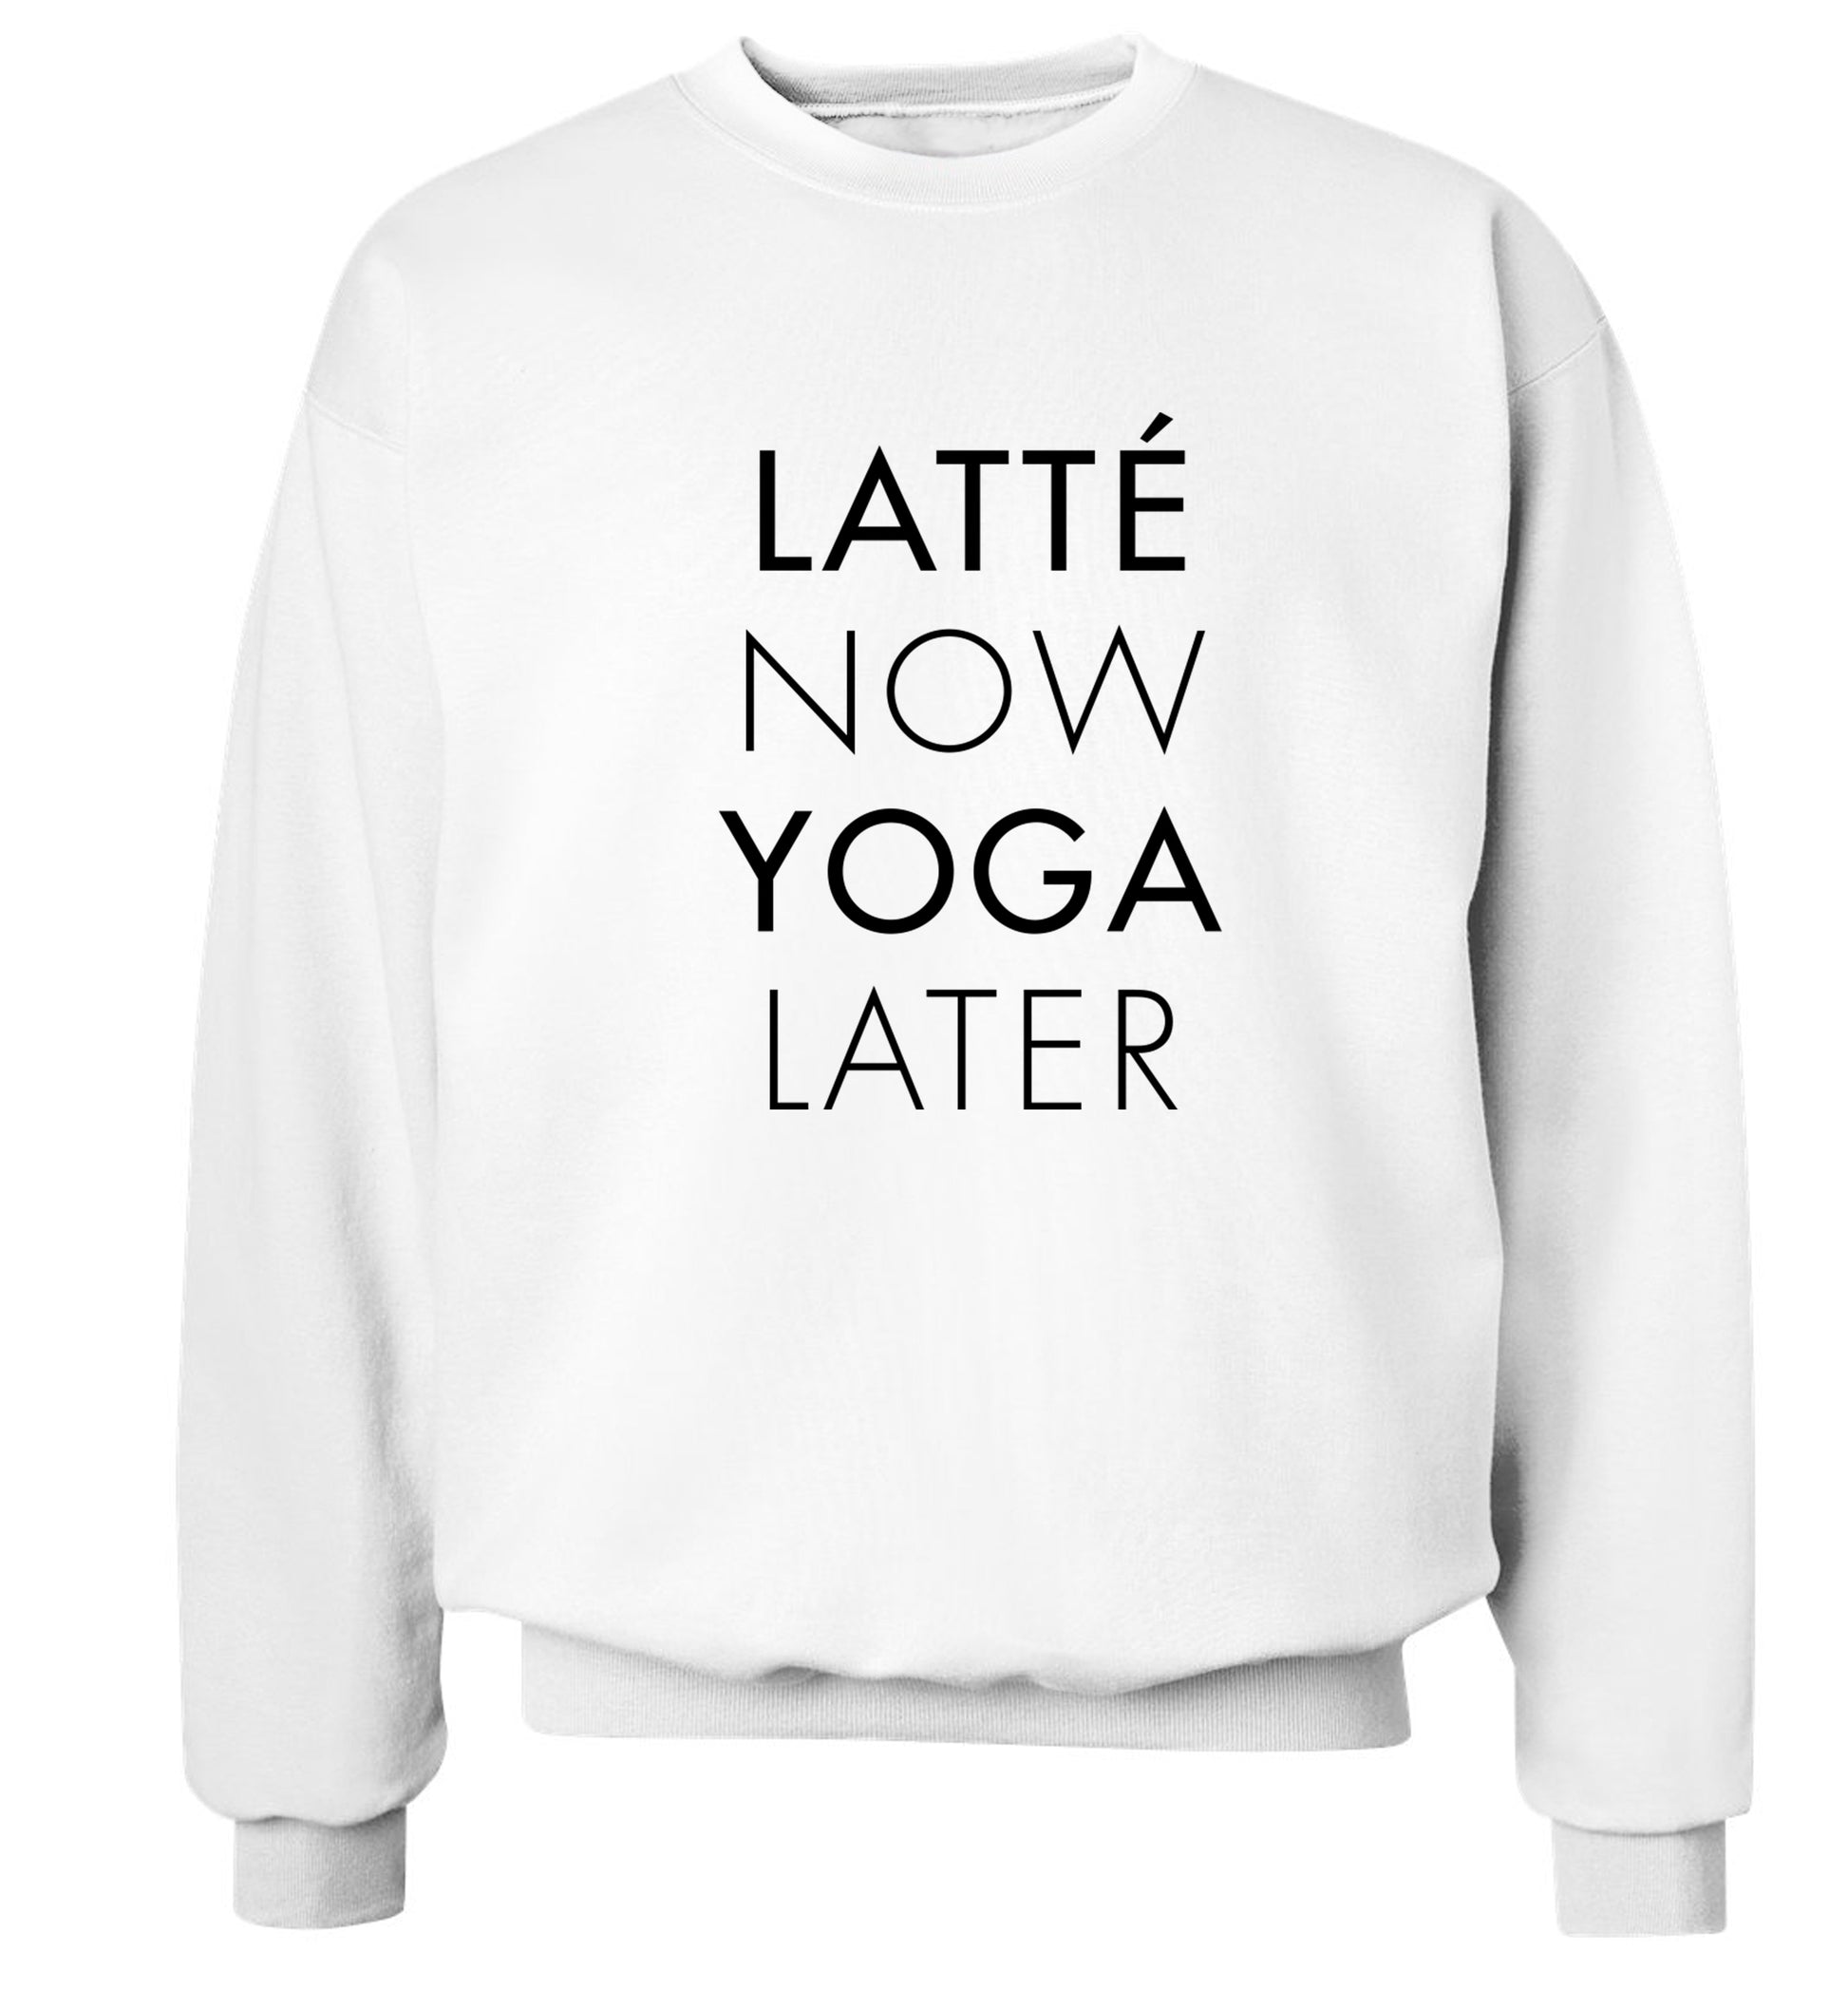 Latte now yoga later Adult's unisex white Sweater 2XL